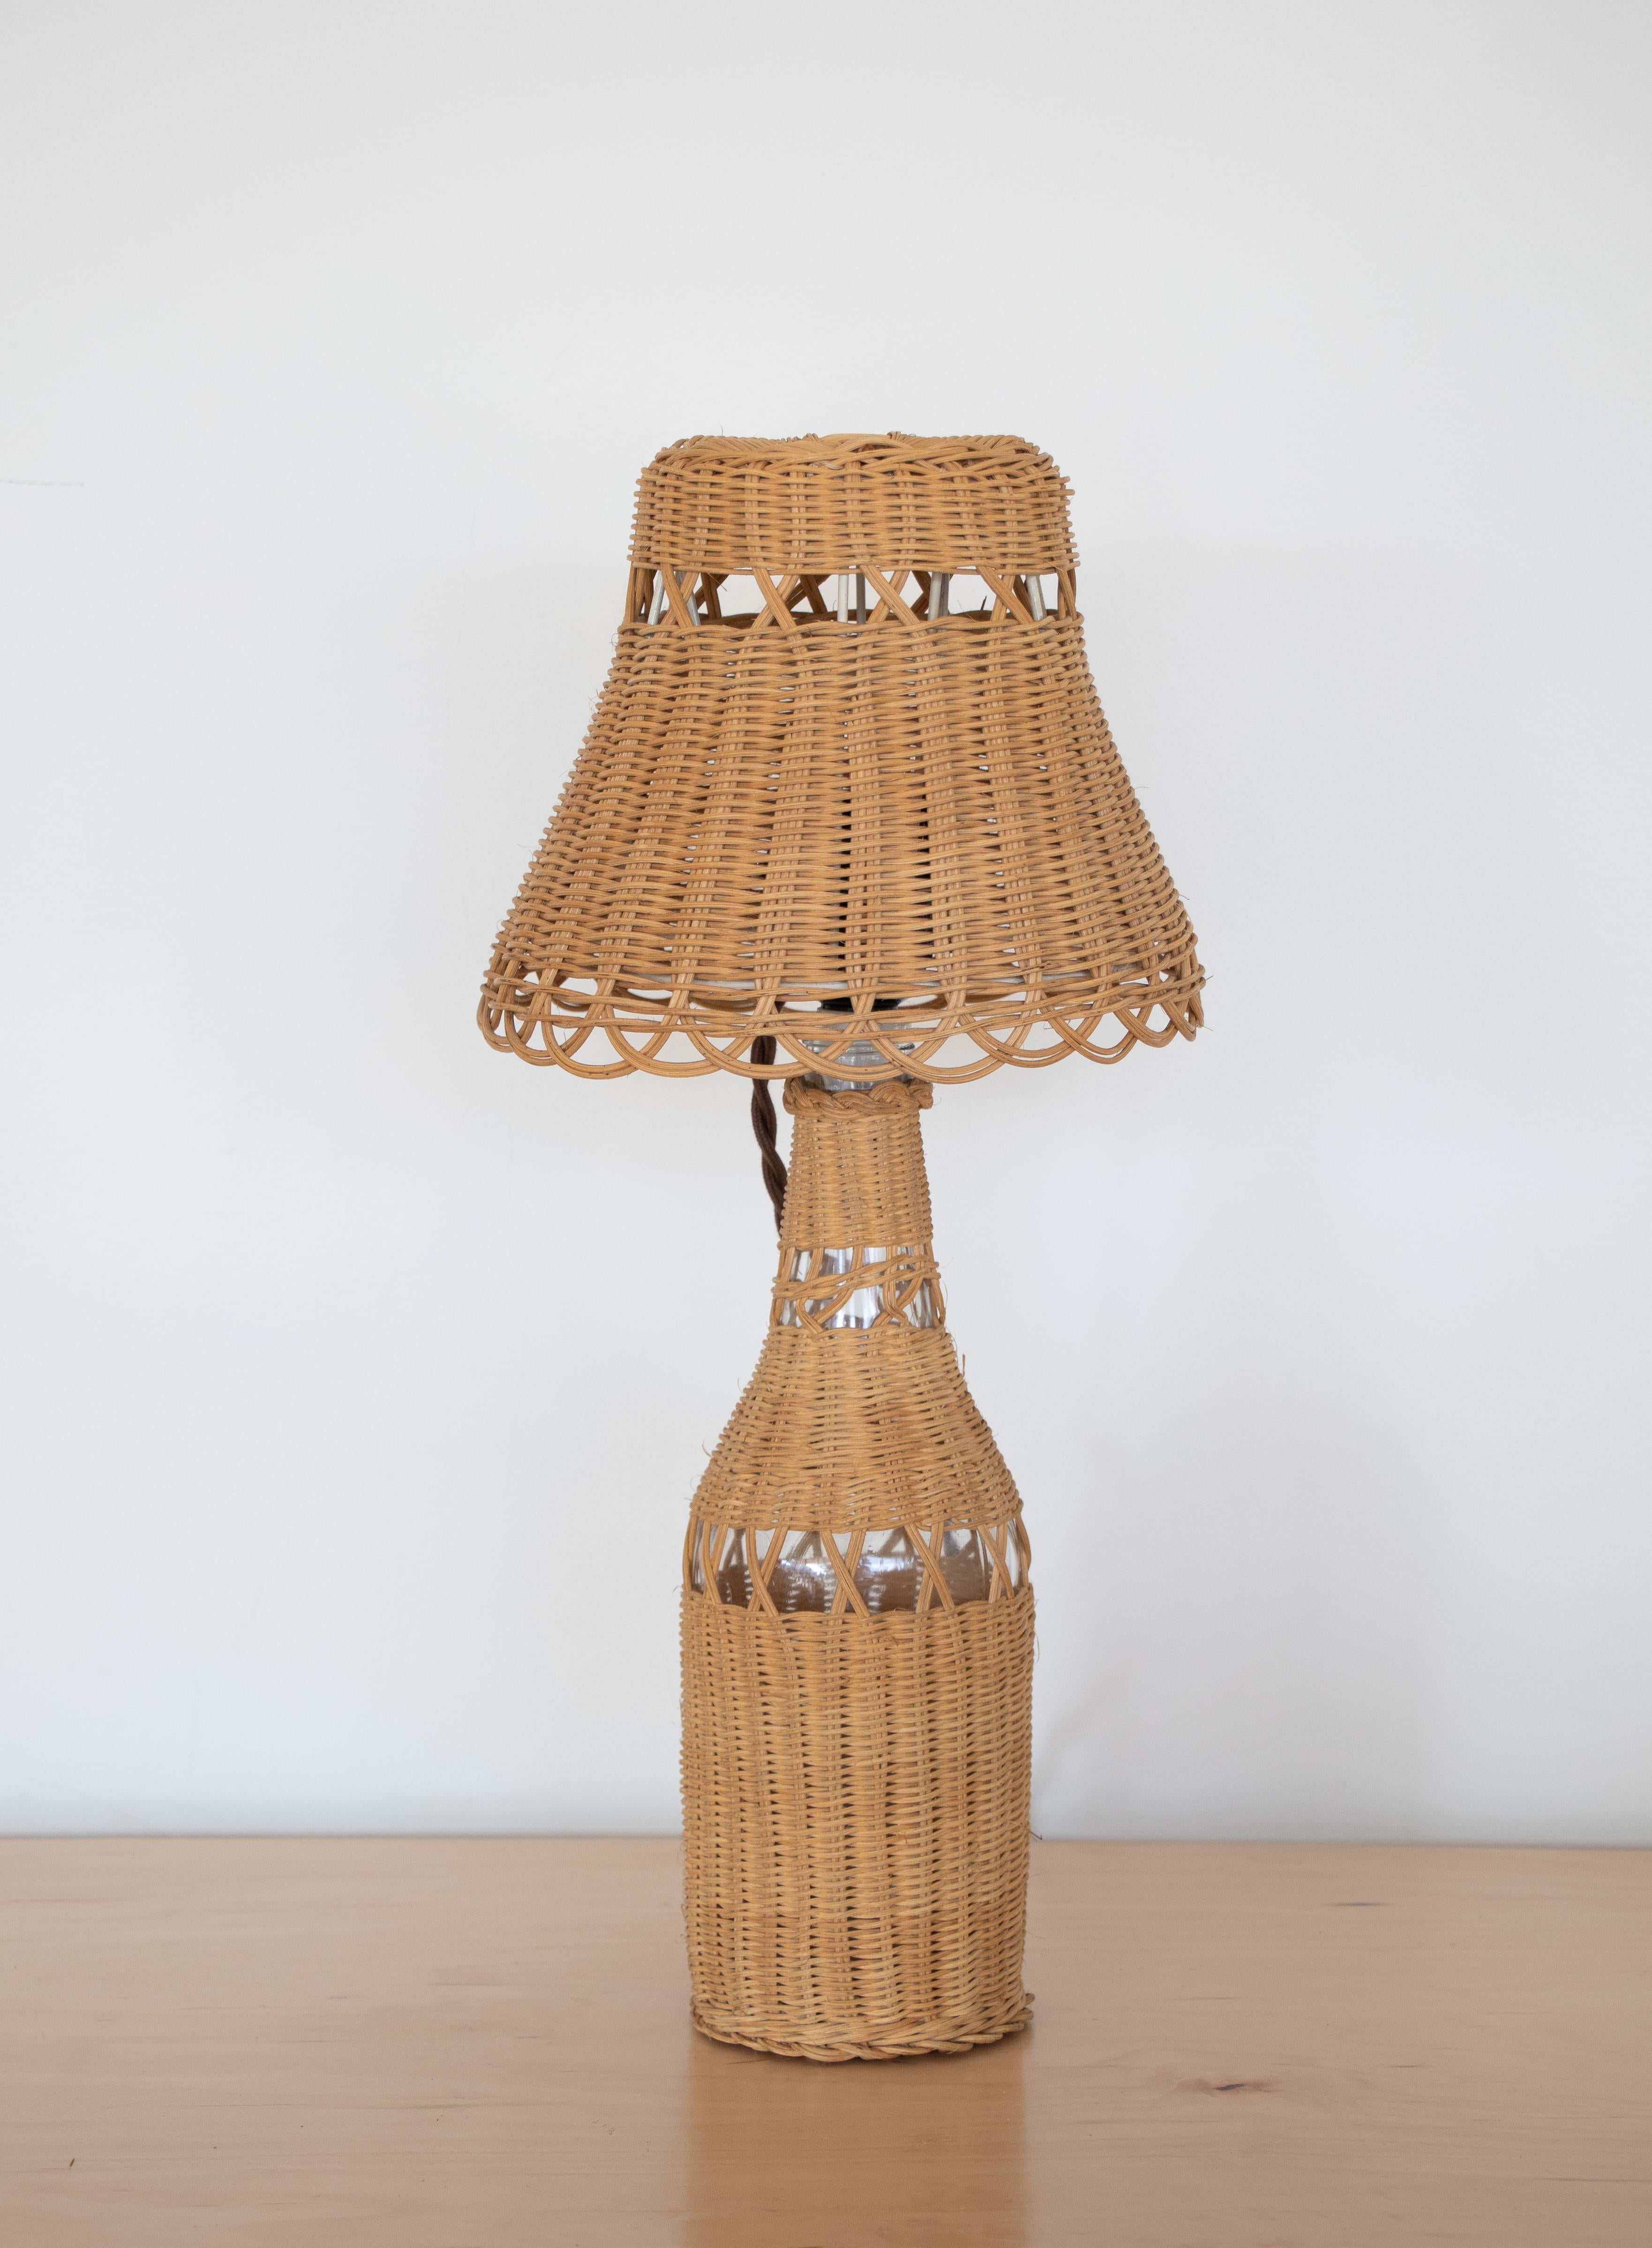 Petite French wicker table lamp with clear glass bottle wrapped in wicker and an all wicker shade. 

Measures: Lamp base diameter 3.5